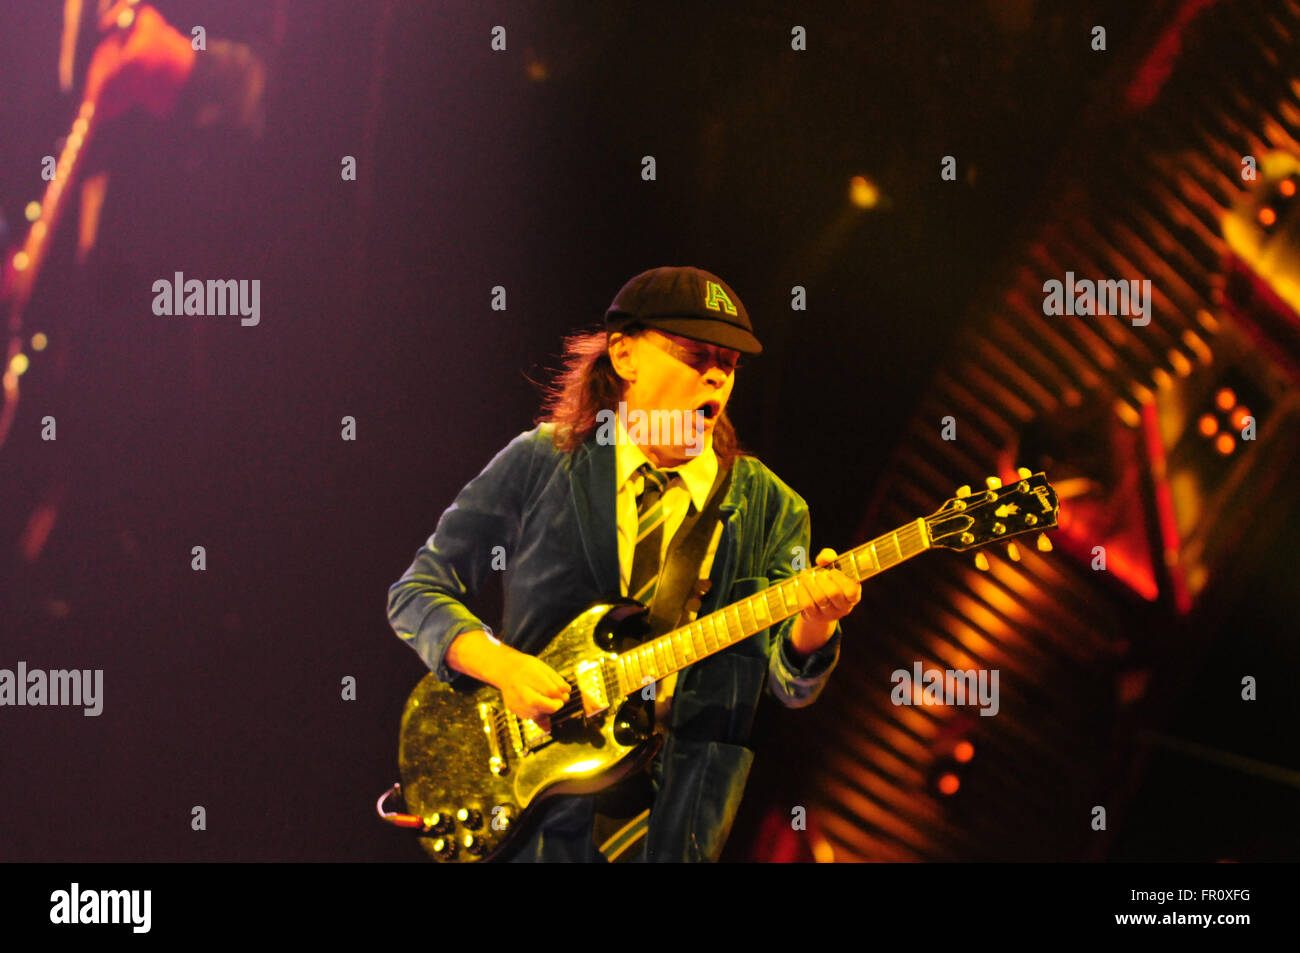 AC/DC Rock or Bust World Tour 2016 at United Center in Chicago, IL, USA on February 17, 2016 SOLD OUT  Featuring: Angus Young Where: Chicago, Illinois, United States When: 18 Feb 2016 Stock Photo